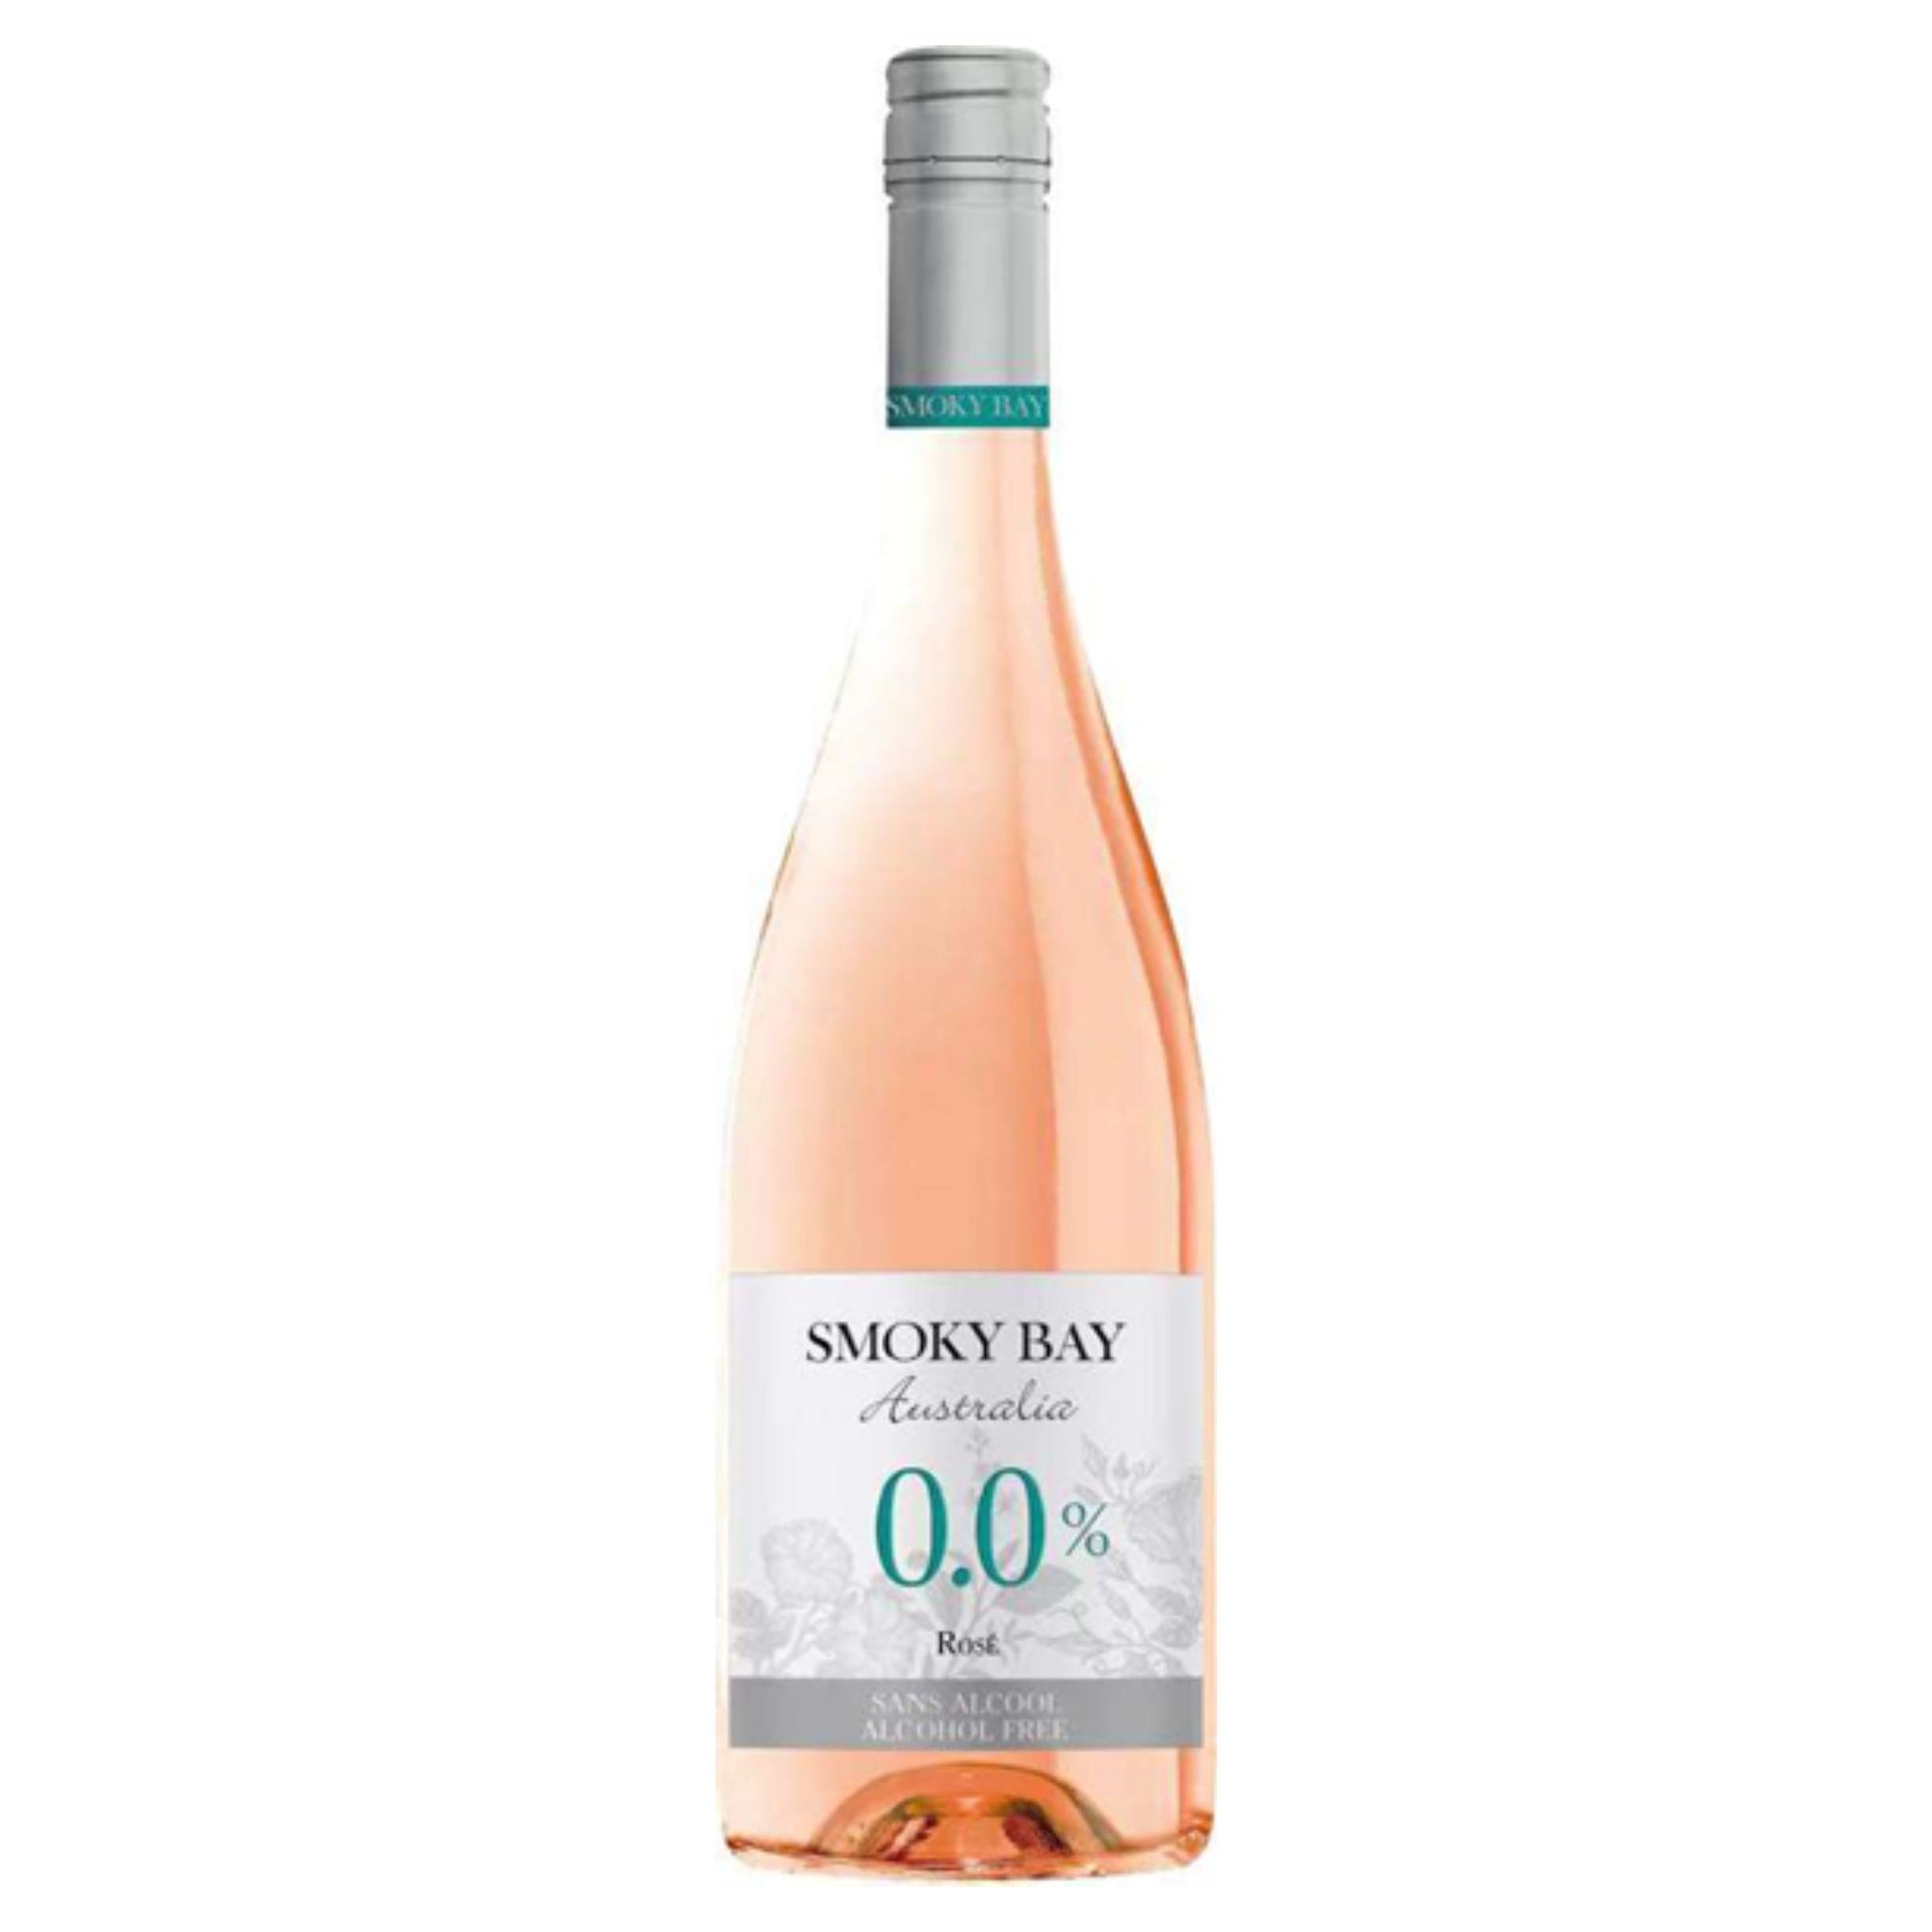 Smoky Bay Non-Alcoholic Rosé is available at Knyota Non-Alcoholic Drinks.